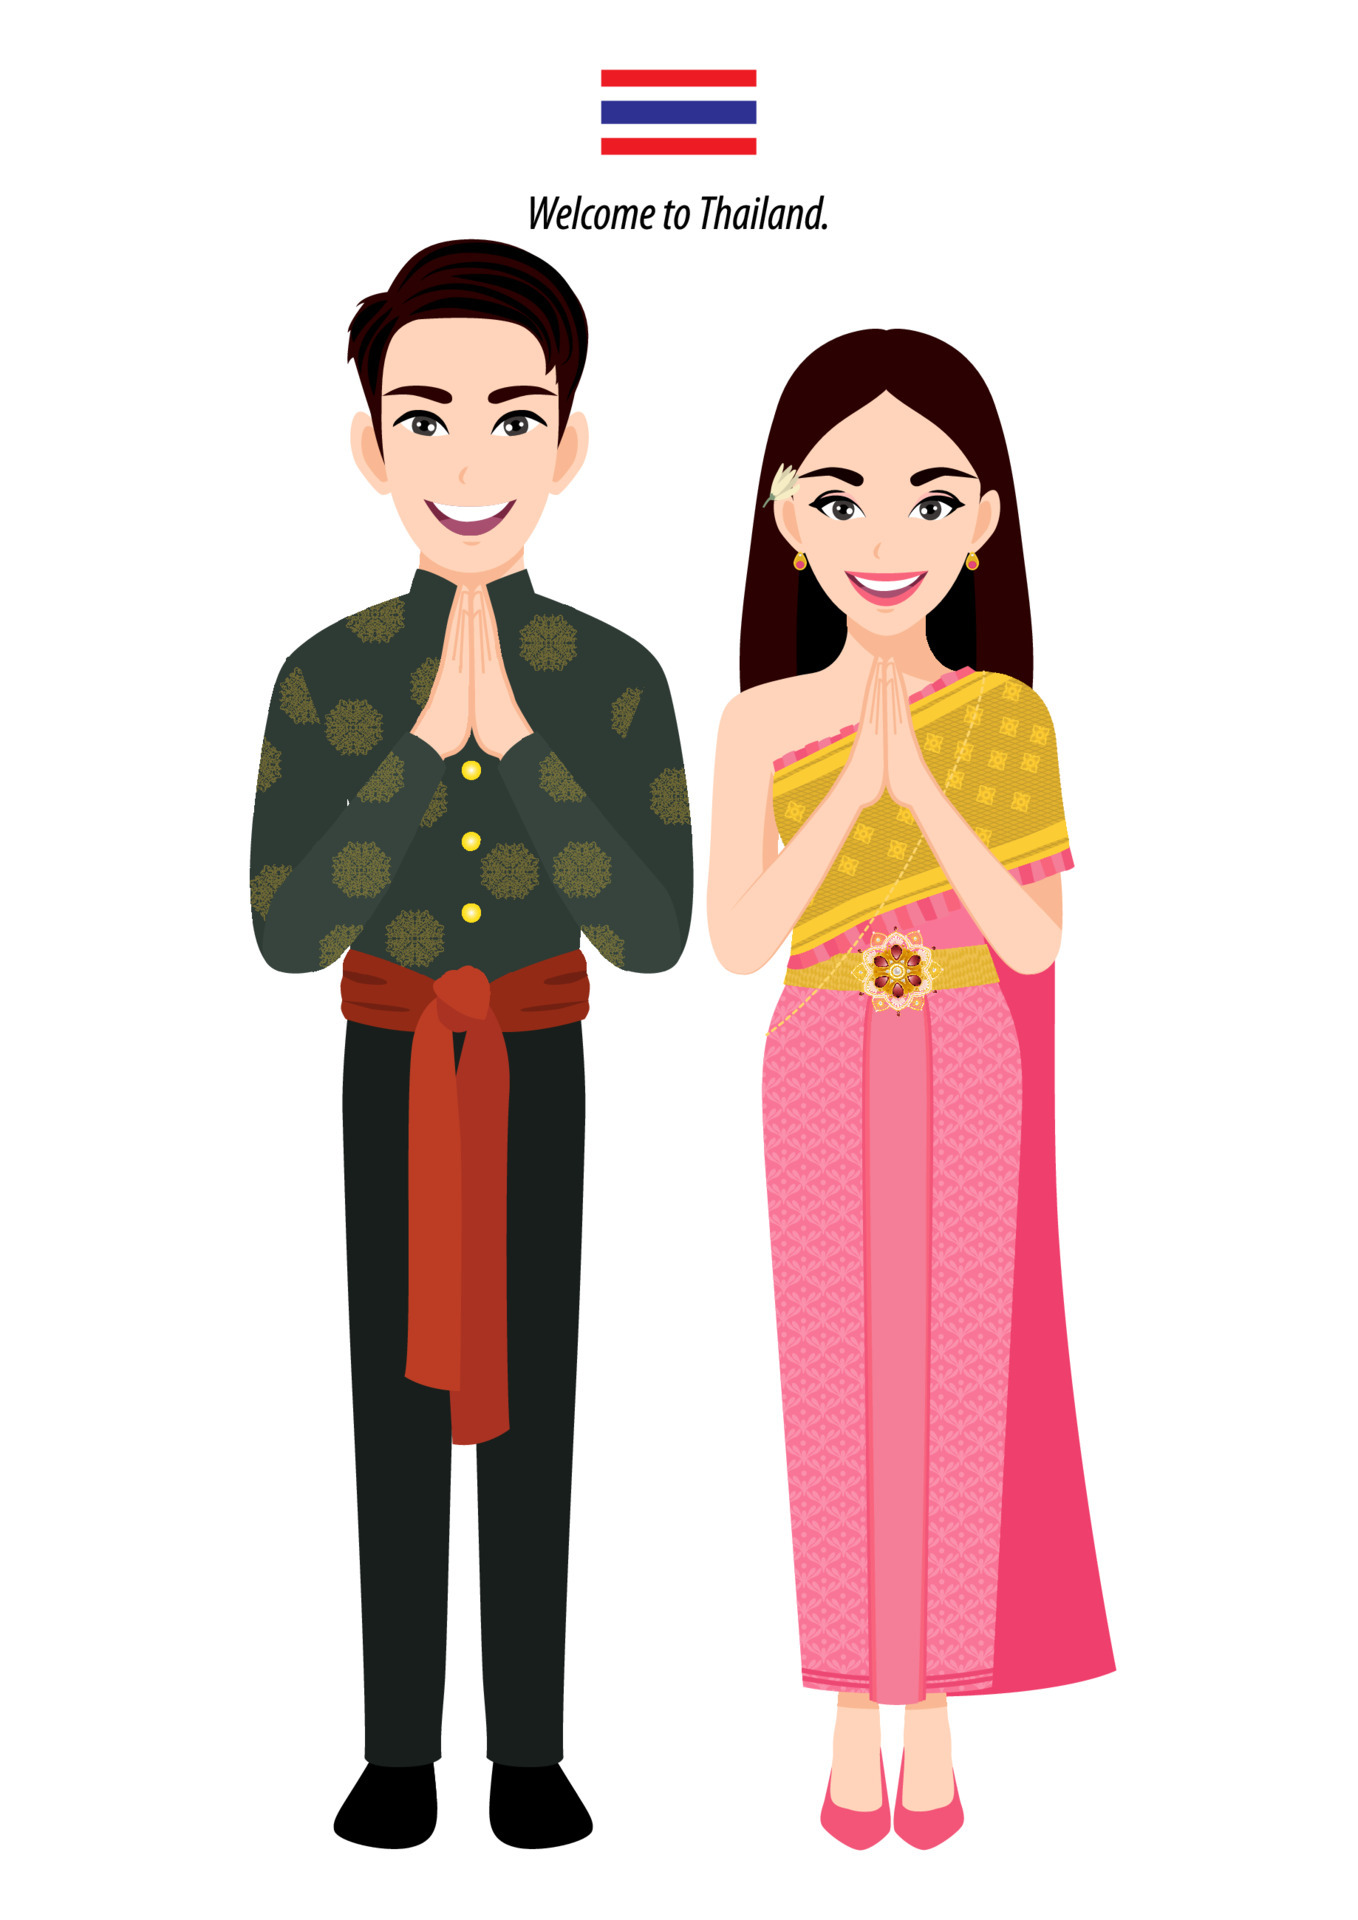 Thailand male and female in traditional costume or Thai people greeting